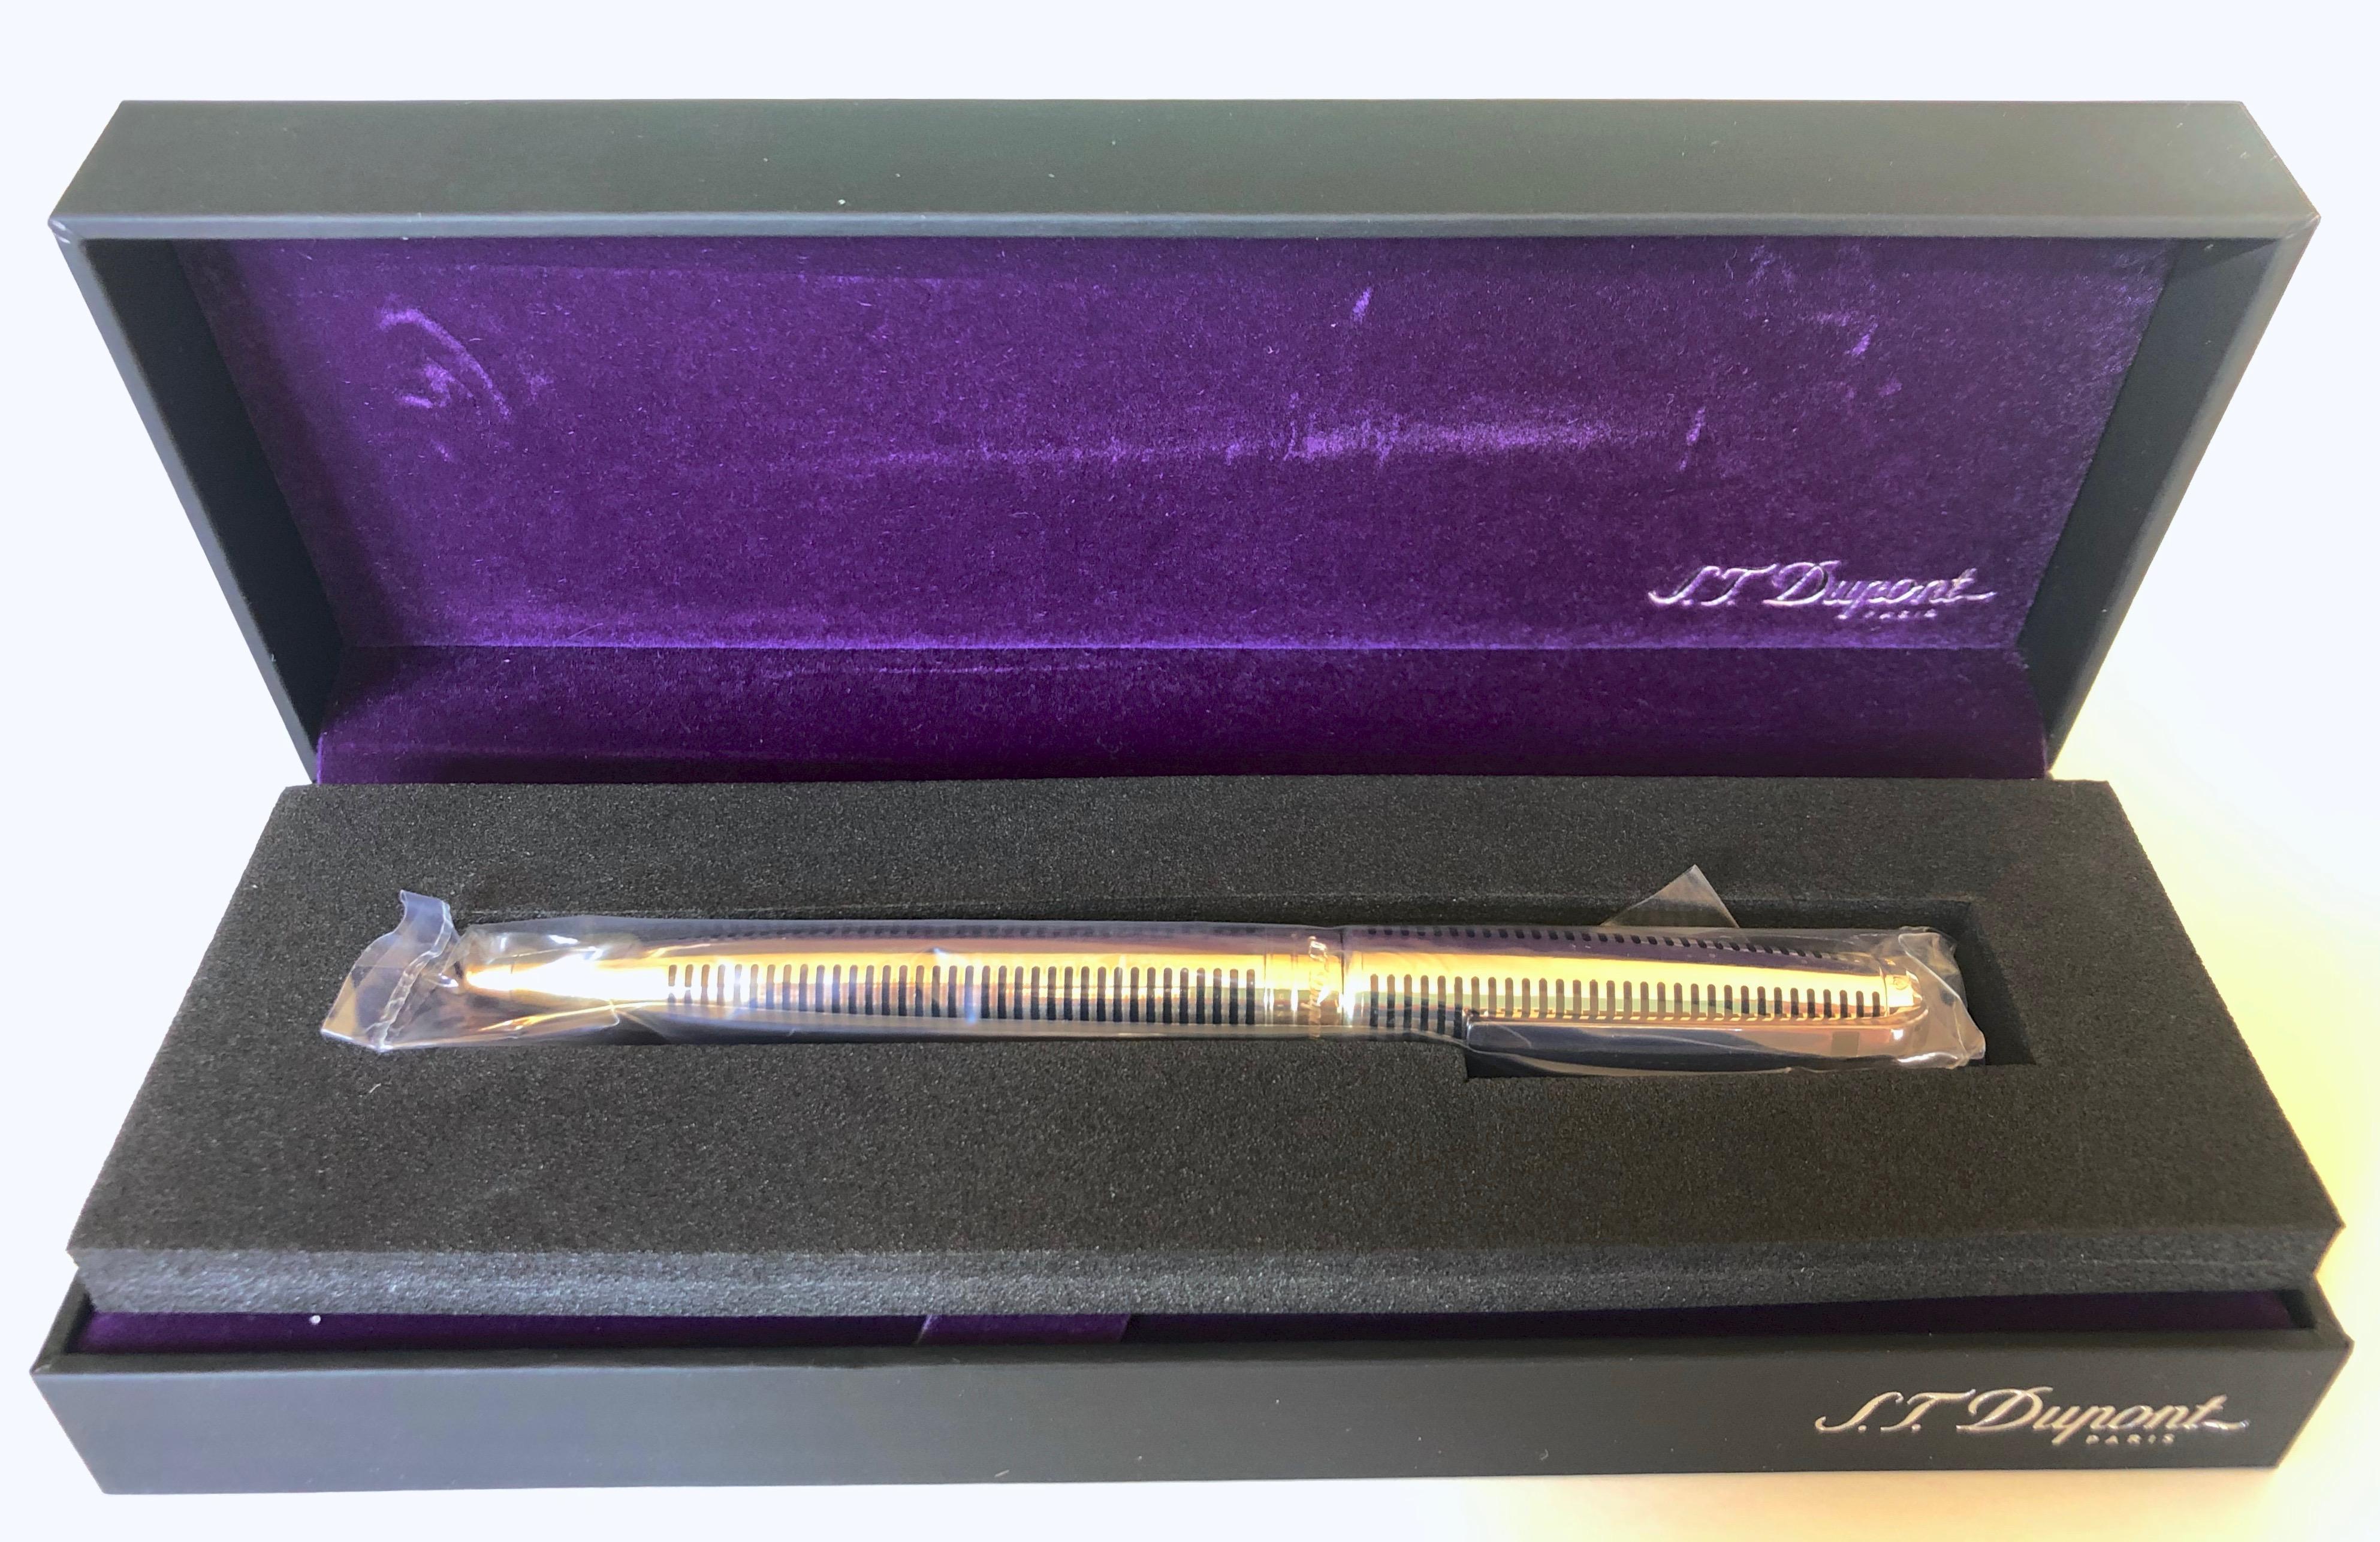 S.T. Dupont Paris Olympio Brand New Large Solid Silver Ball Point Pen in Box 2